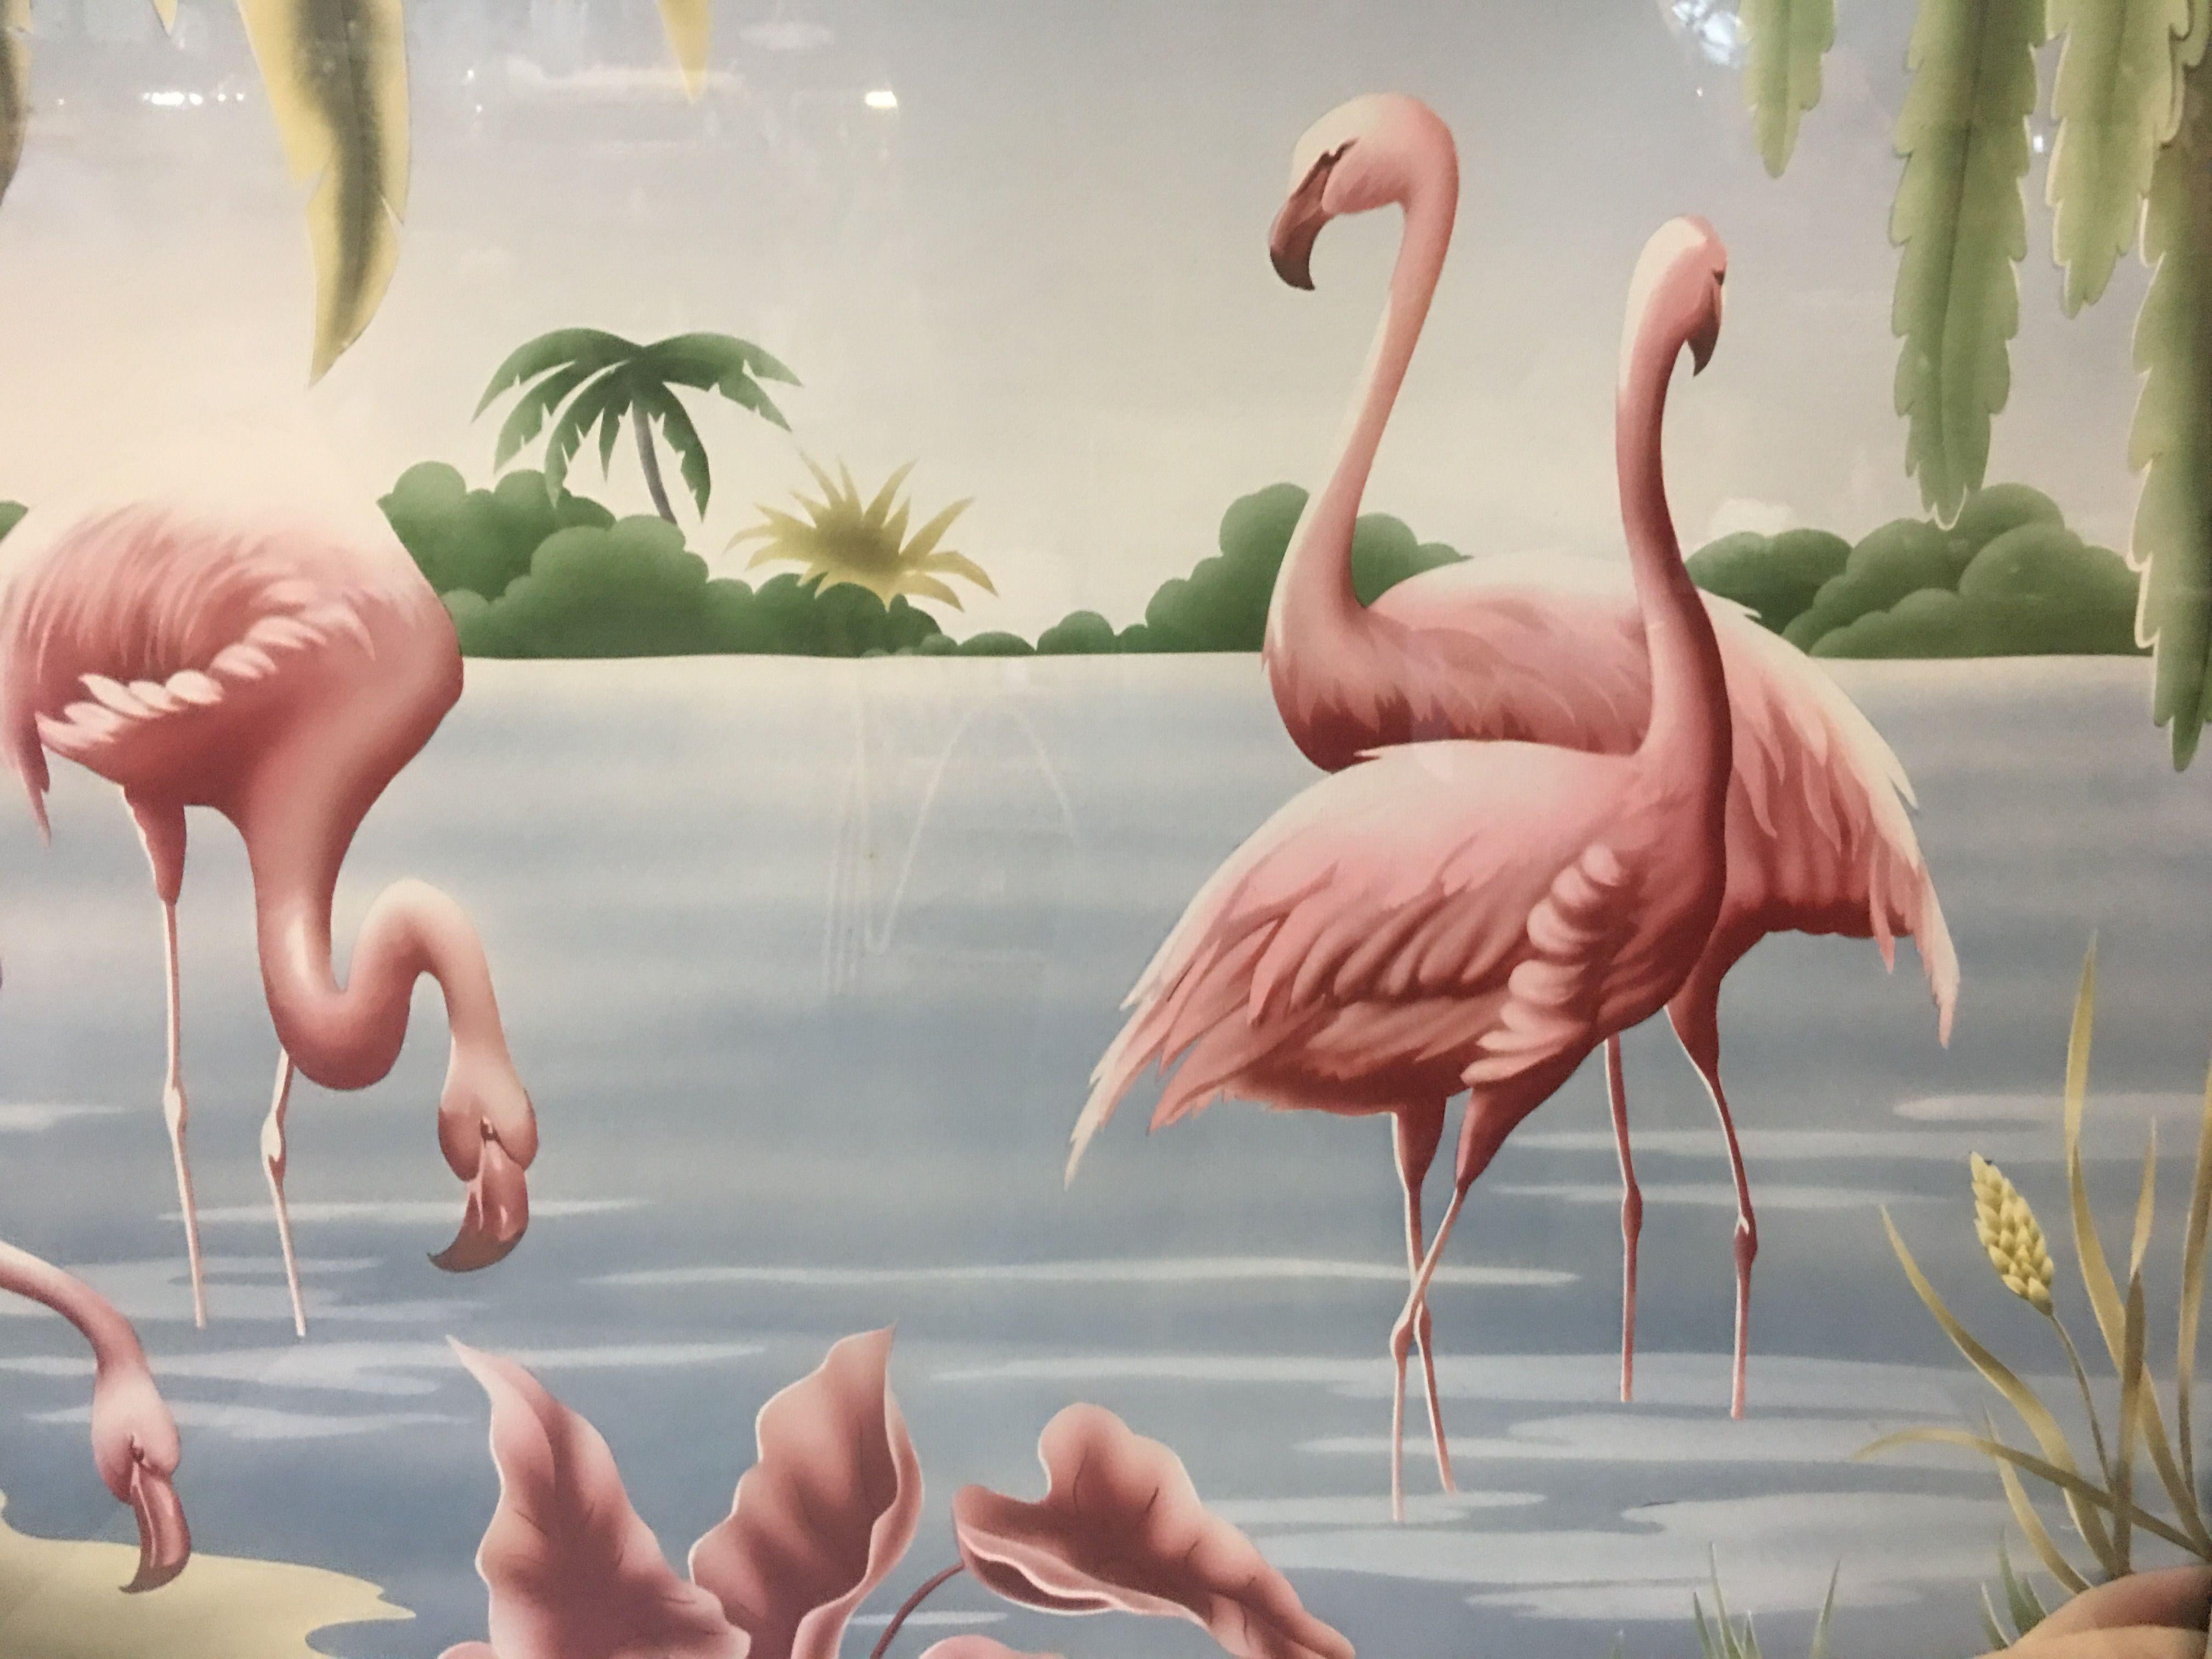 Billy Seay Airbrushed Flamingos (original airbrushed over a print) for the Turner Company, circa 1947, in the original mirrored frame. A great example of the post-WWII Hawaiian and tropical art/decorating boom. Great for vintage Art Deco dwellings